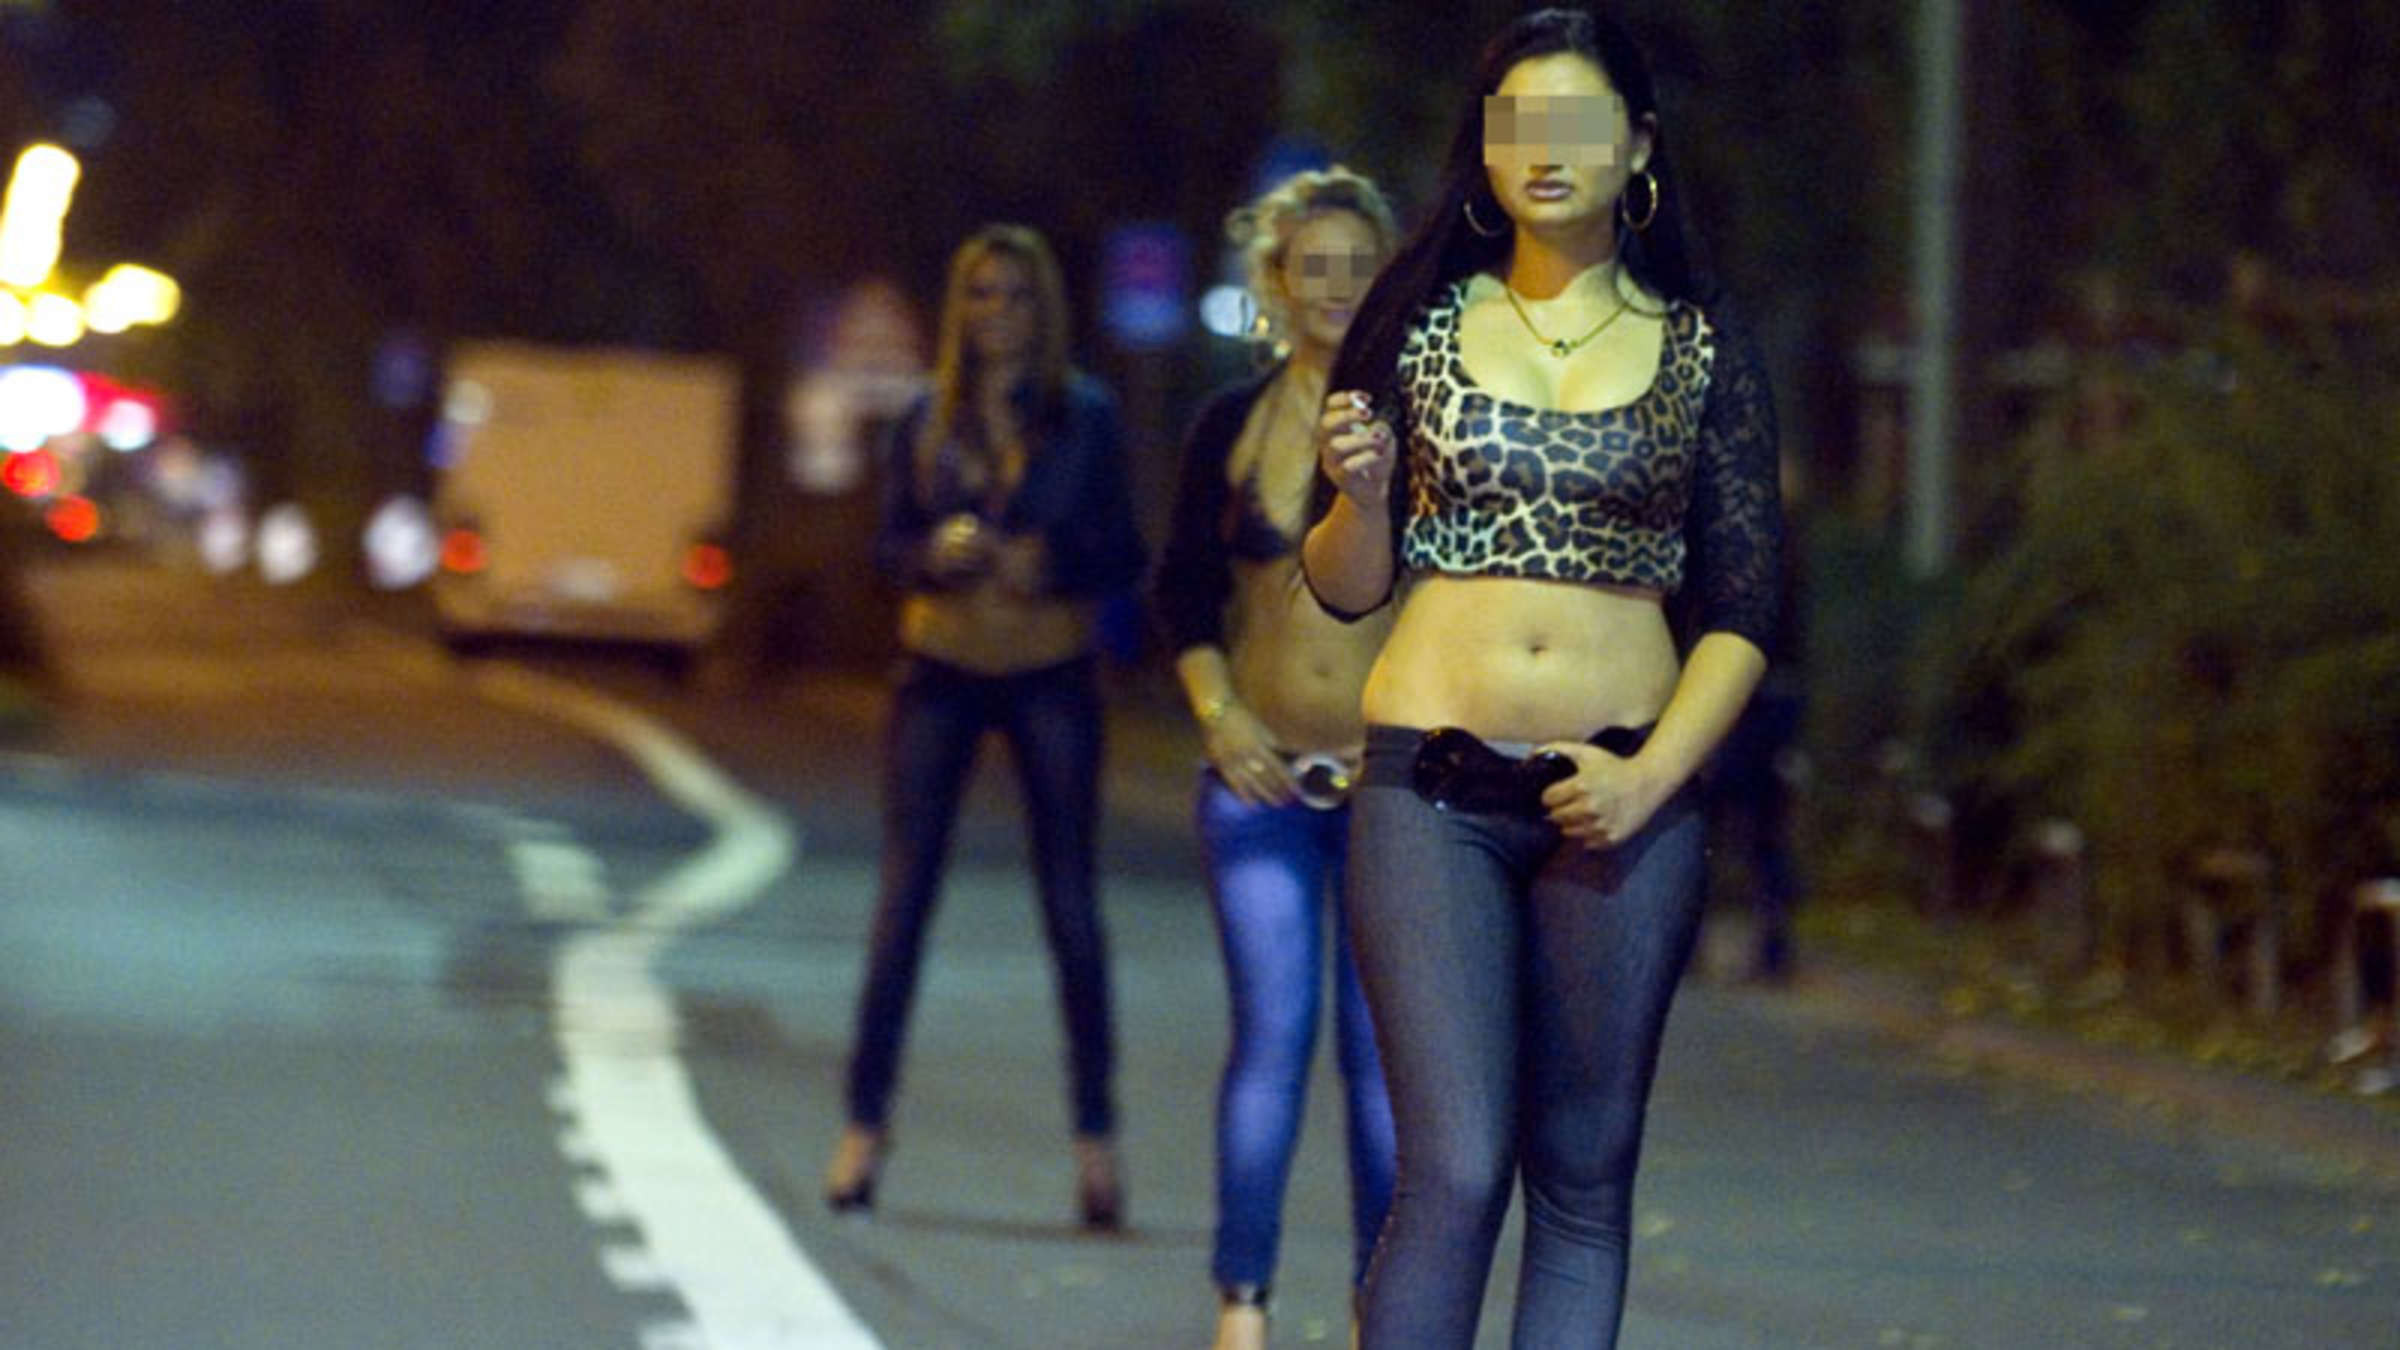  Find Prostitutes in Hamm,Germany